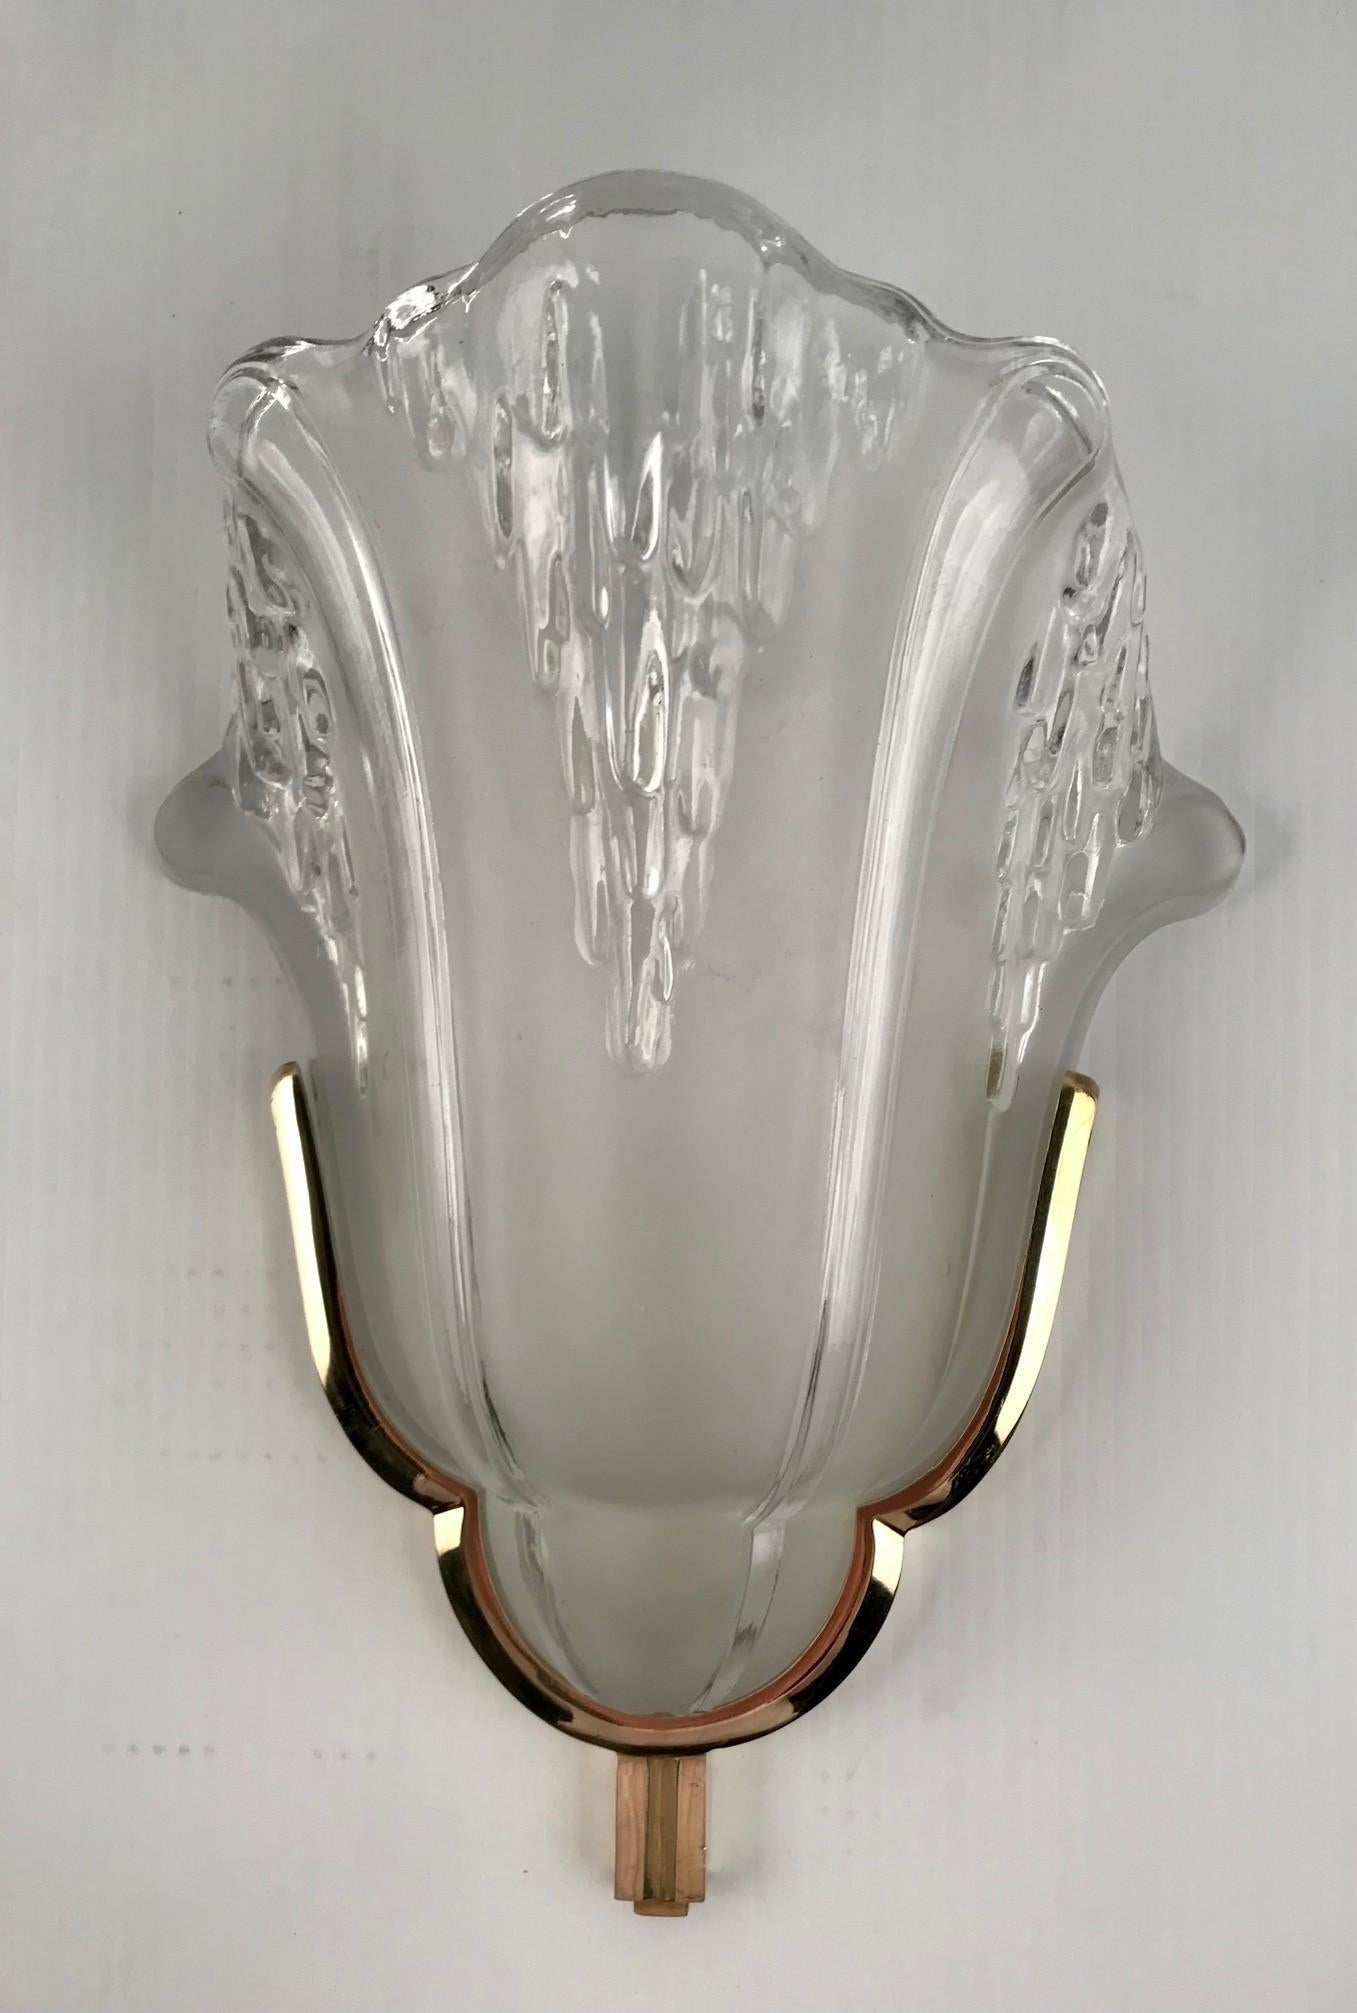  French Art Deco Wall Sconces by Petitot, 1930 Set of Four For Sale 1